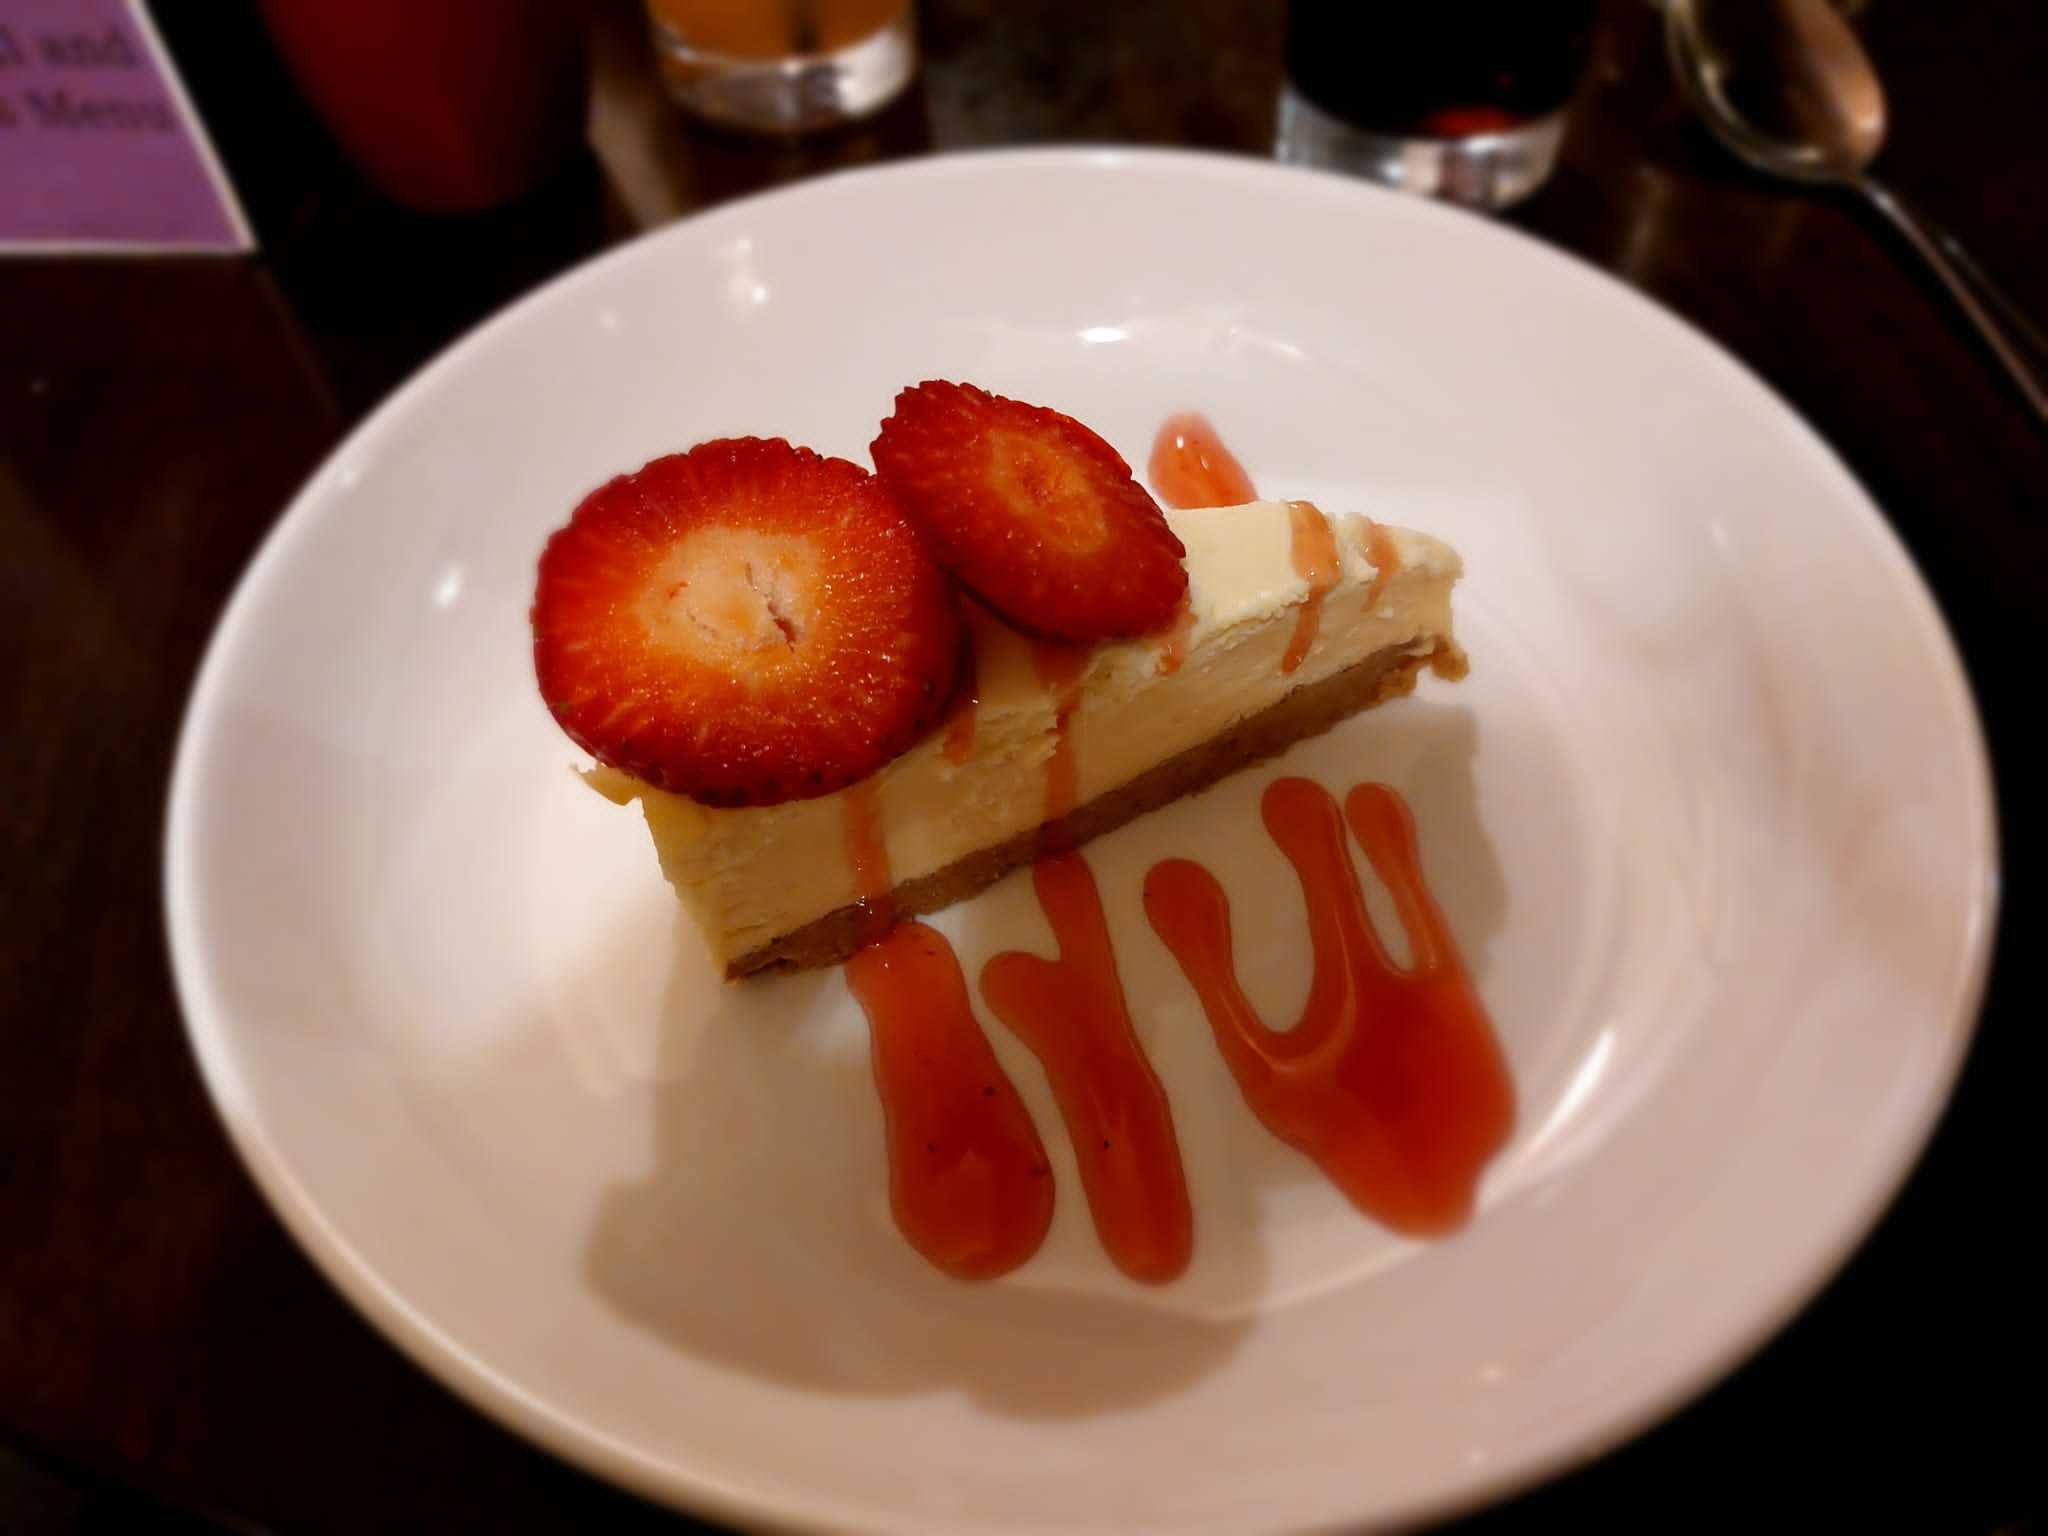 Strawberry cheesecake at the Fox & Grapes in Hawarden.